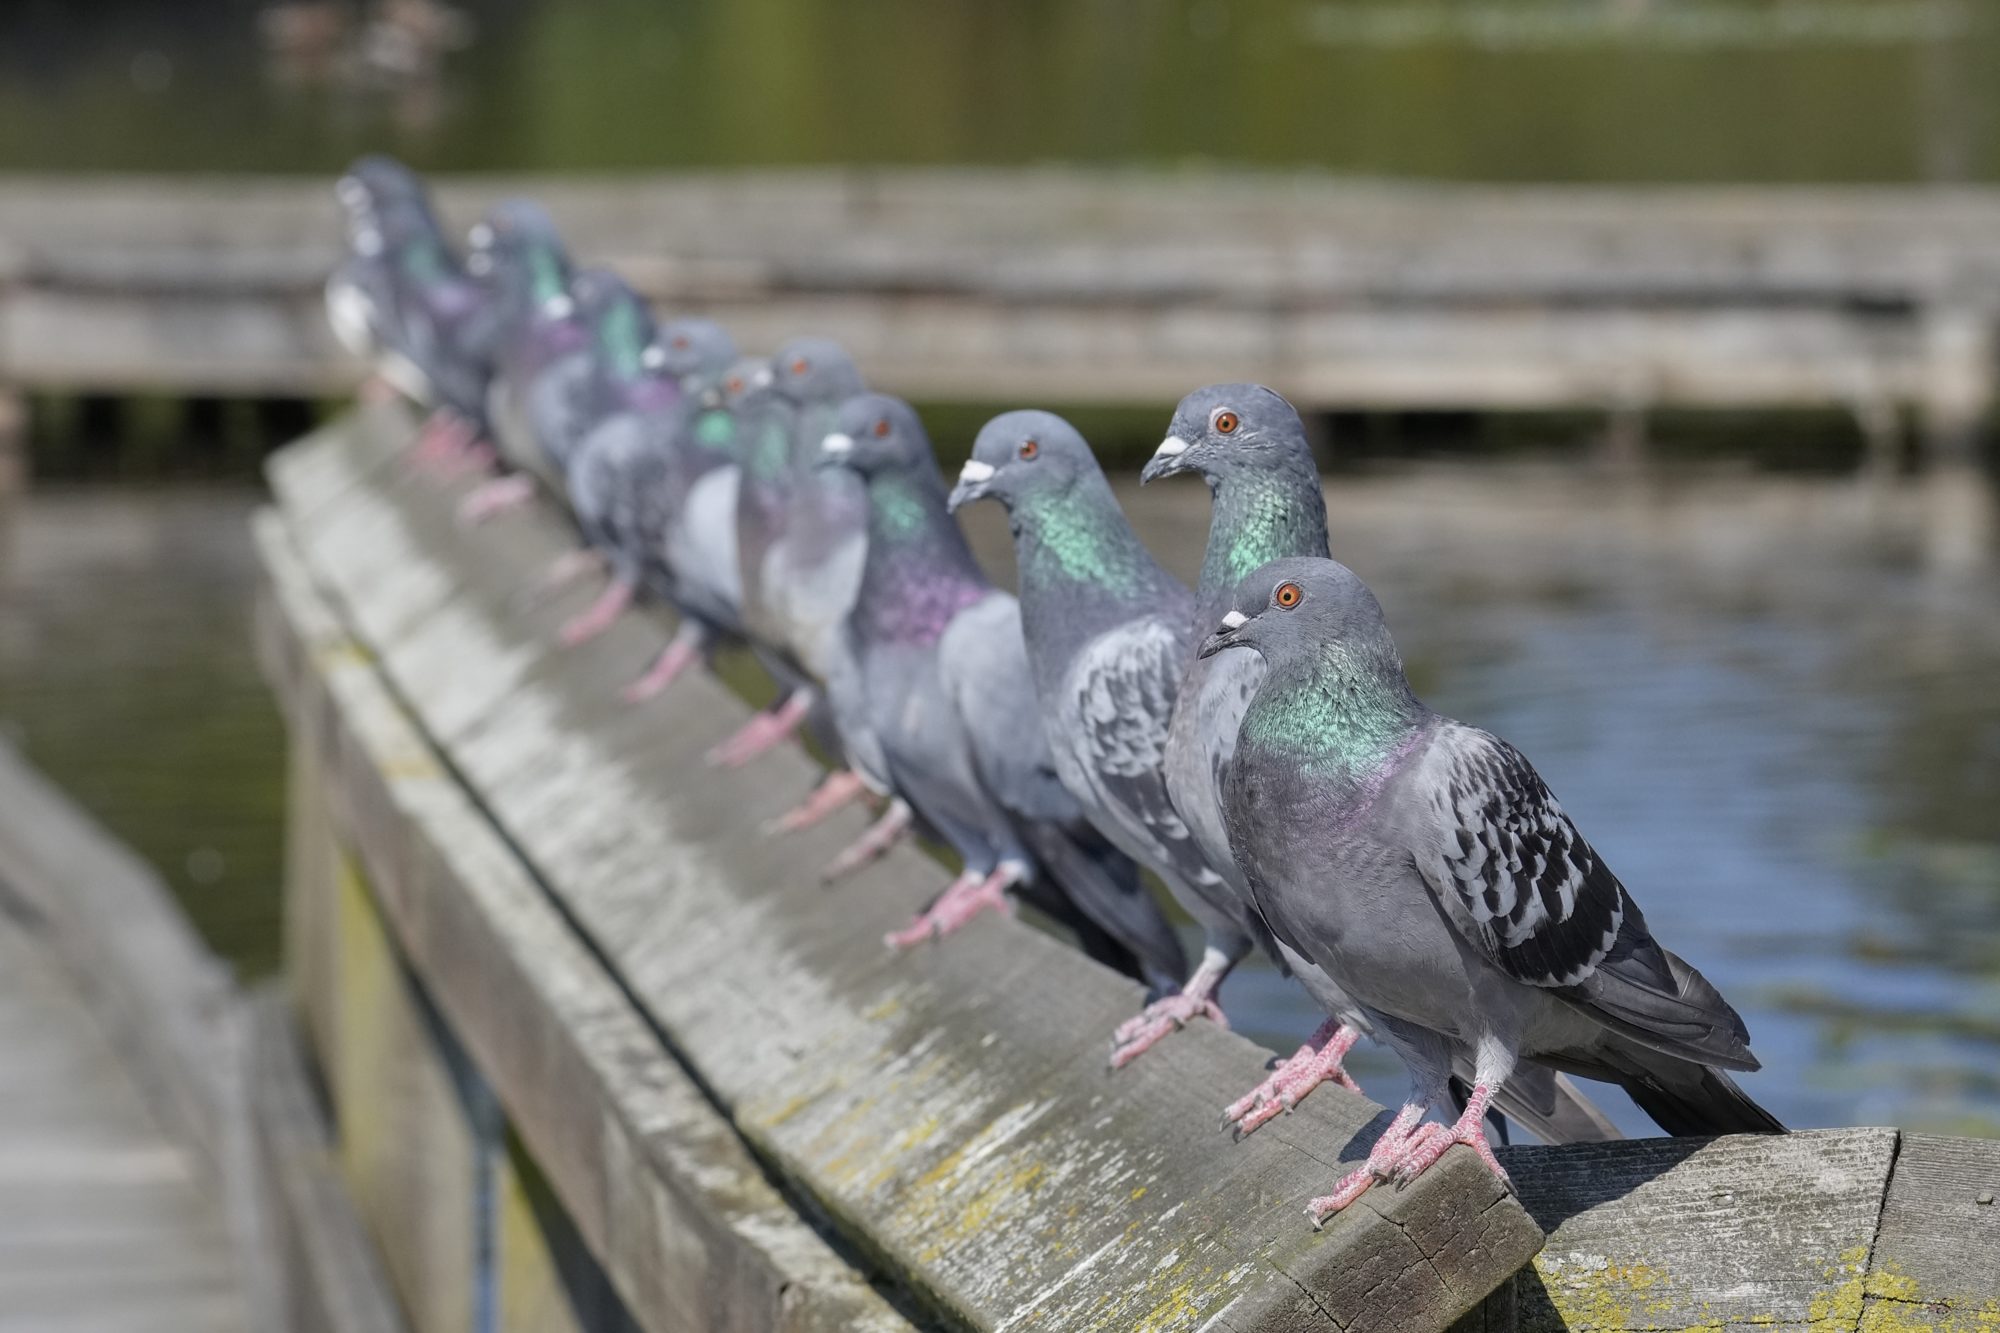 Over a dozen Rock Pigeons lined up on a wooden fence